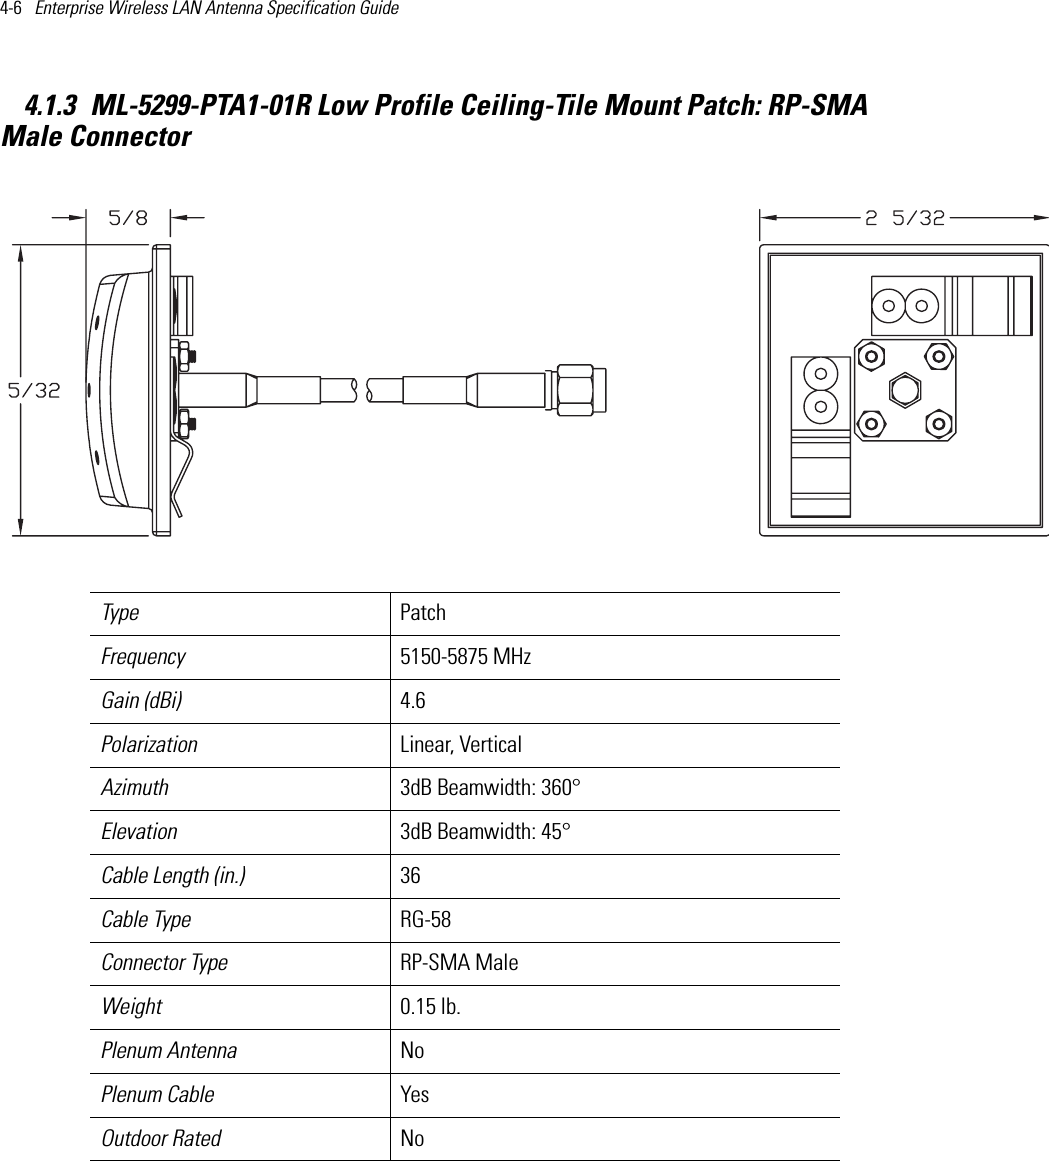 4-6   Enterprise Wireless LAN Antenna Specification Guide 4.1.3 ML-5299-PTA1-01R Low Profile Ceiling-Tile Mount Patch: RP-SMA Male Connector  Type PatchFrequency 5150-5875 MHzGain (dBi) 4.6Polarization Linear, VerticalAzimuth 3dB Beamwidth: 360°Elevation 3dB Beamwidth: 45°Cable Length (in.) 36Cable Type RG-58Connector Type RP-SMA MaleWeight 0.15 lb.Plenum Antenna NoPlenum Cable YesOutdoor Rated No